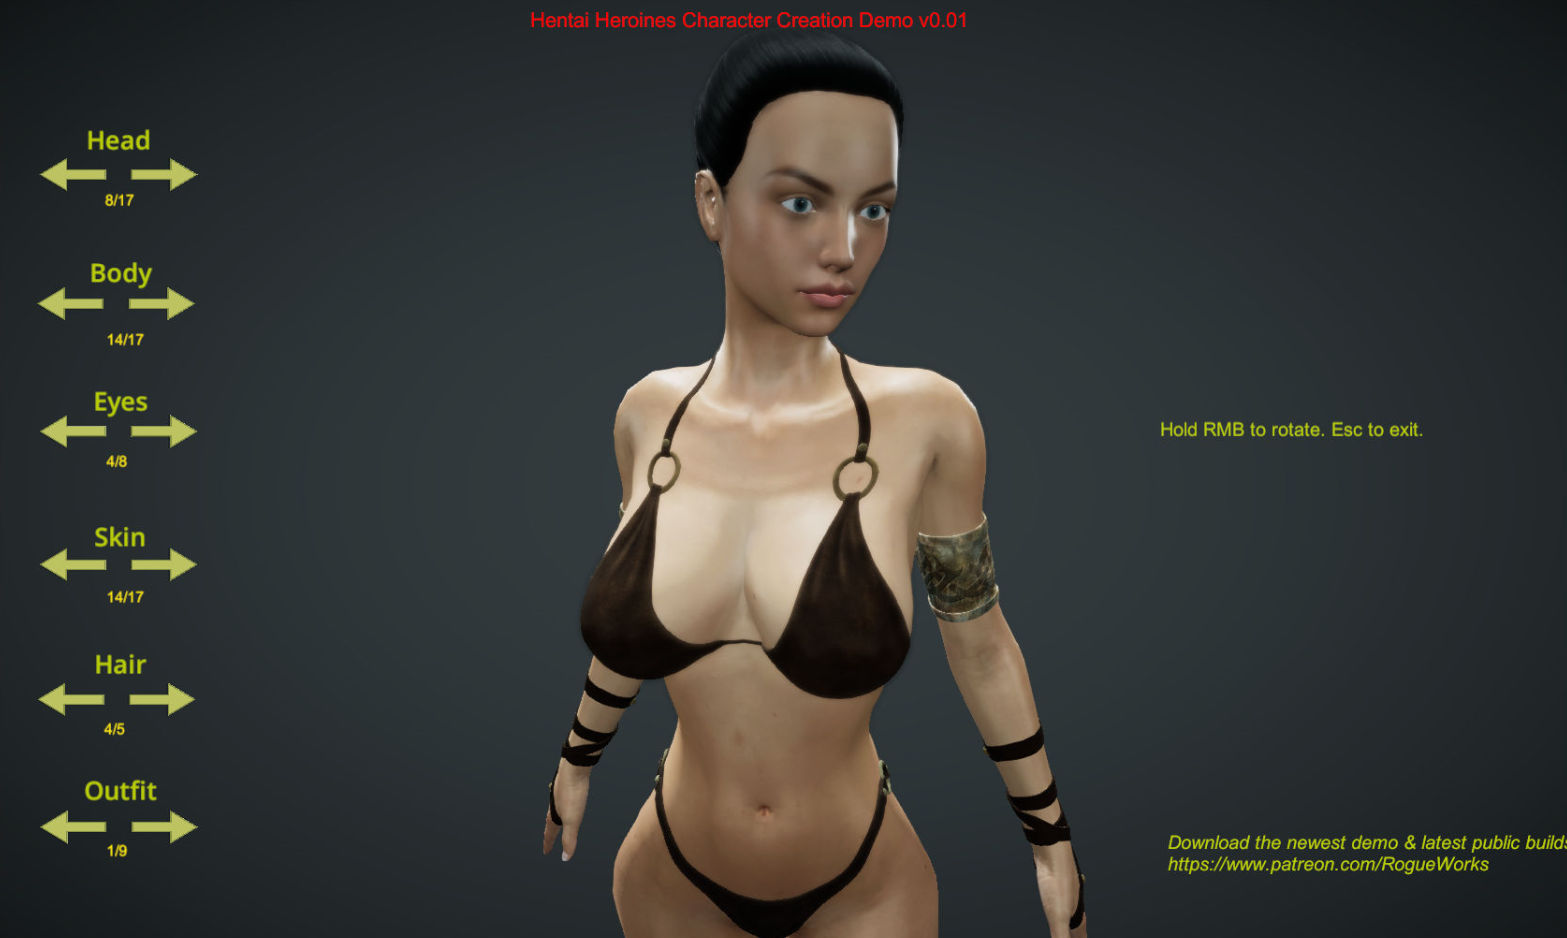 Hentai Heroines Character Creation Demo v0.1 from RogueWorks